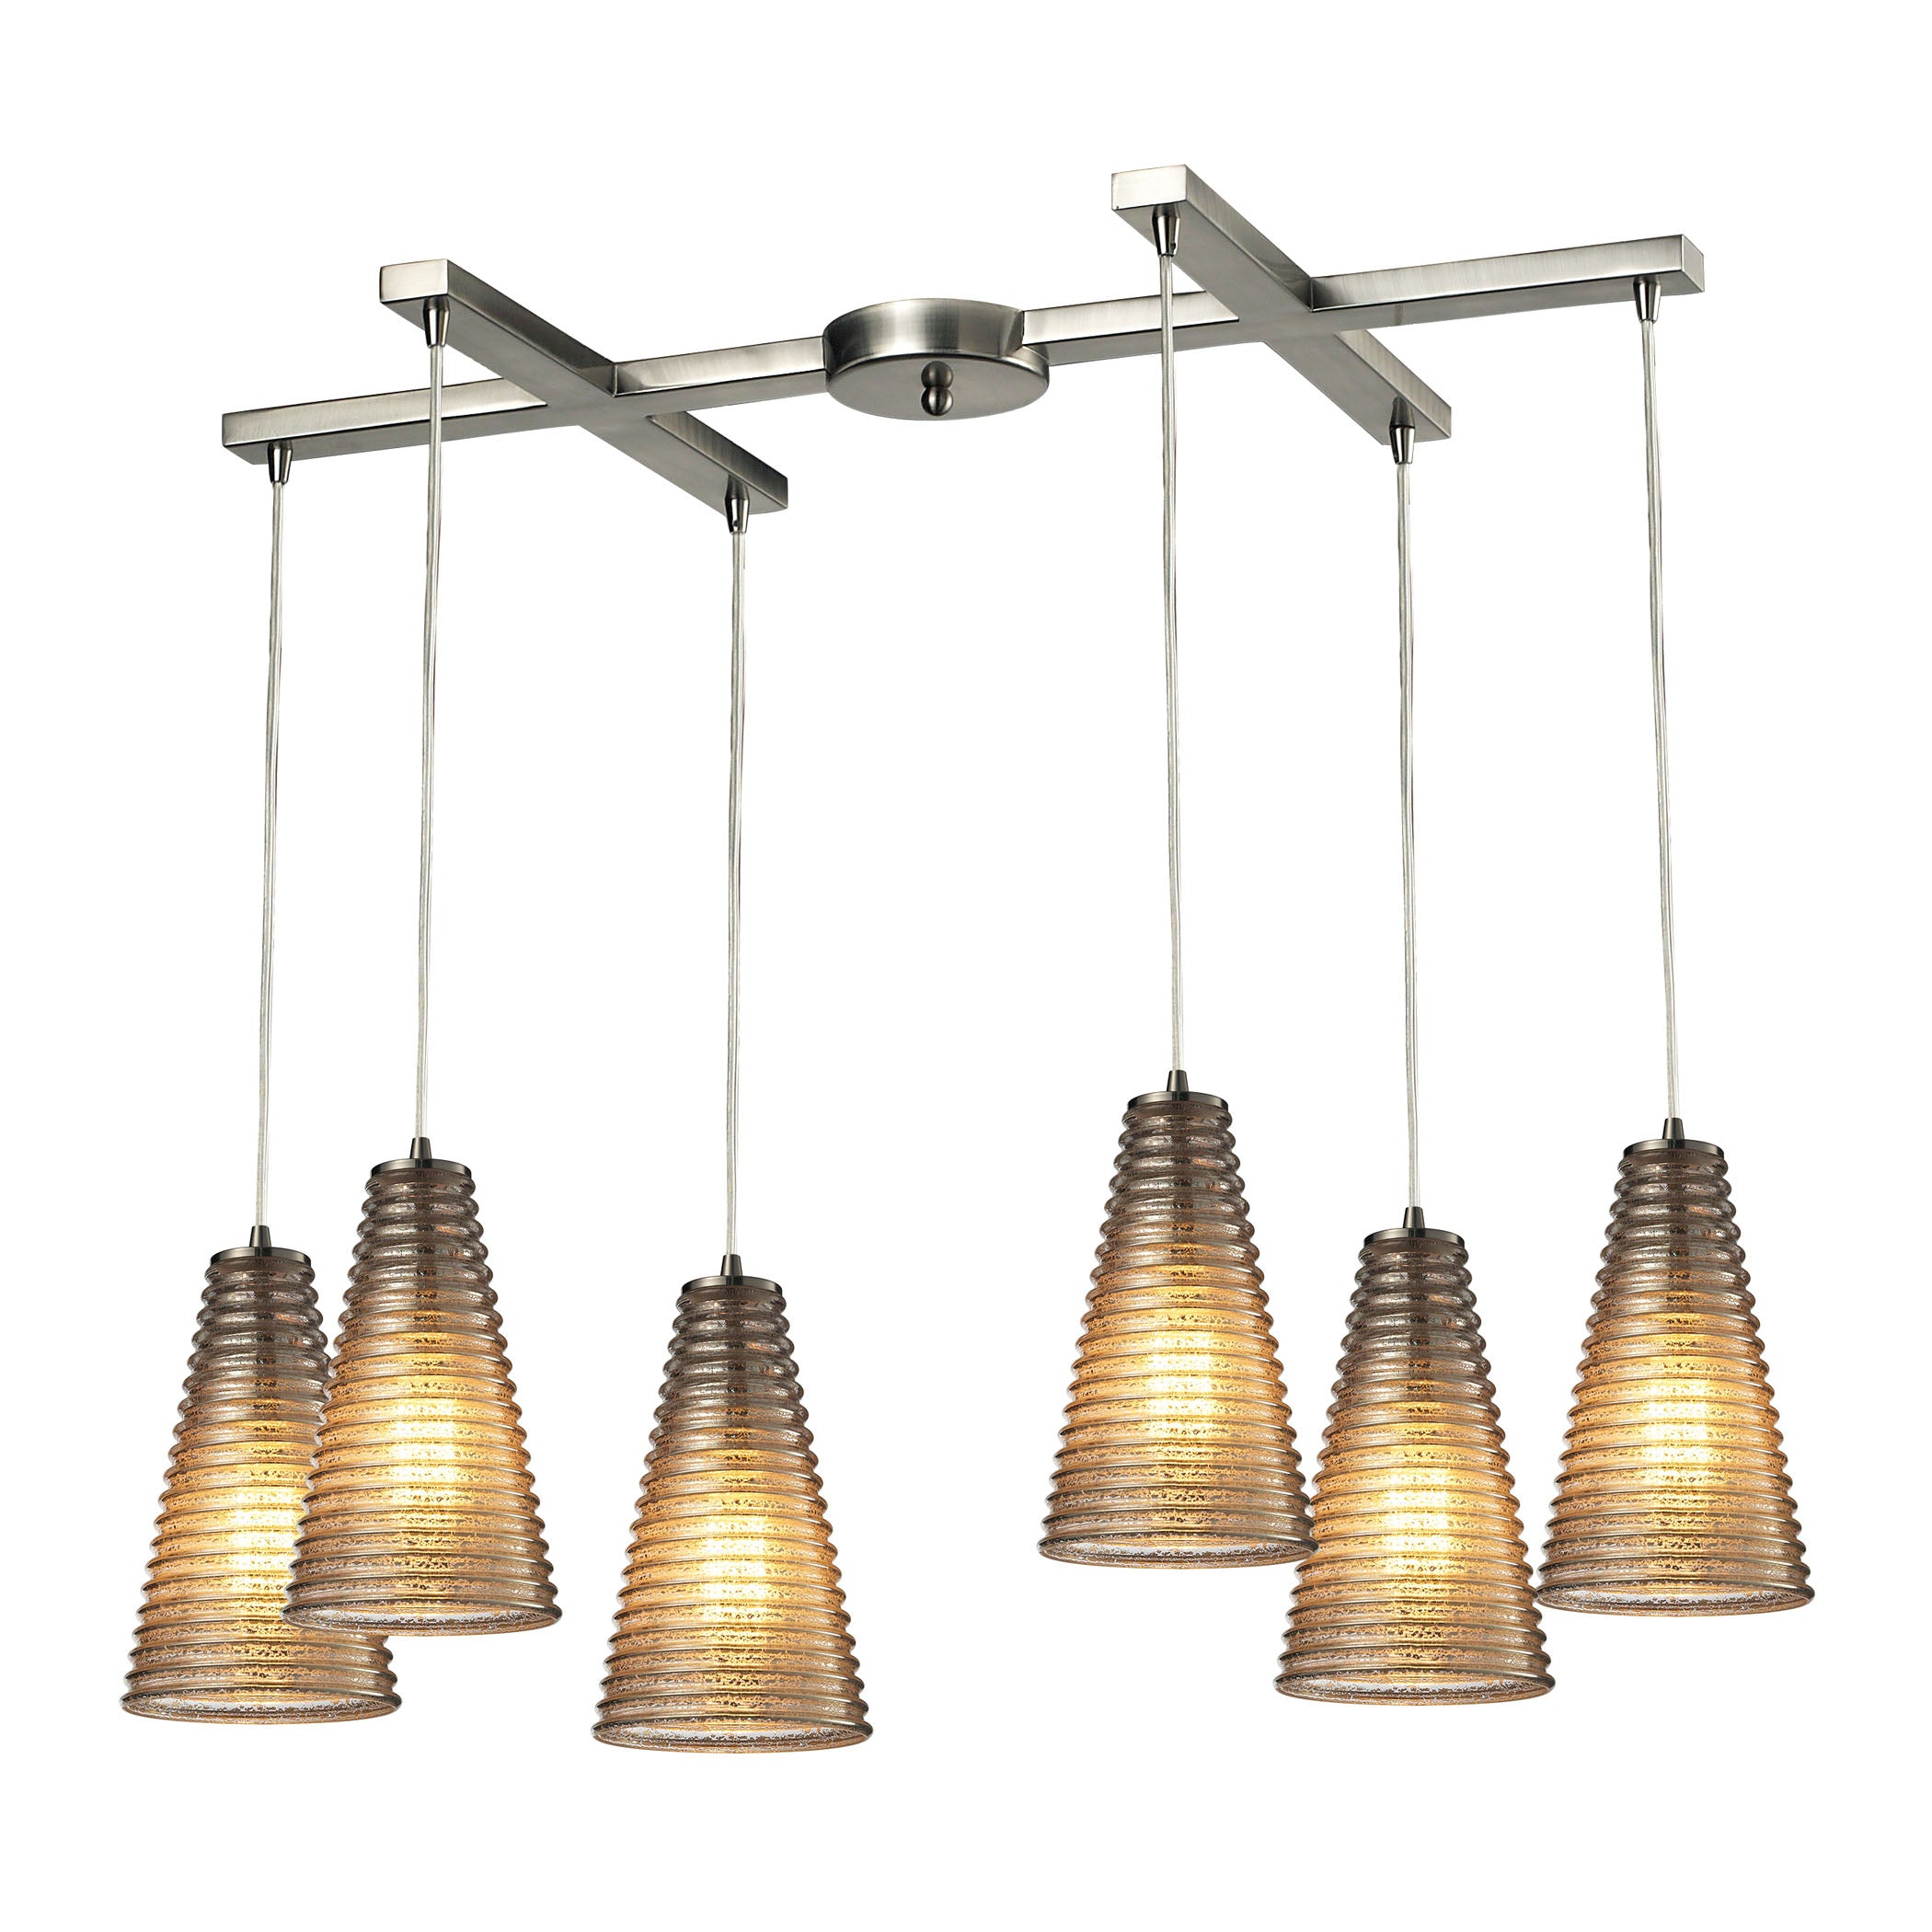 ELK Lighting 10333/6 Ribbed Glass 6-Light H-Bar Pendant Fixture in Satin Nickel with Amber Ribbed Glass